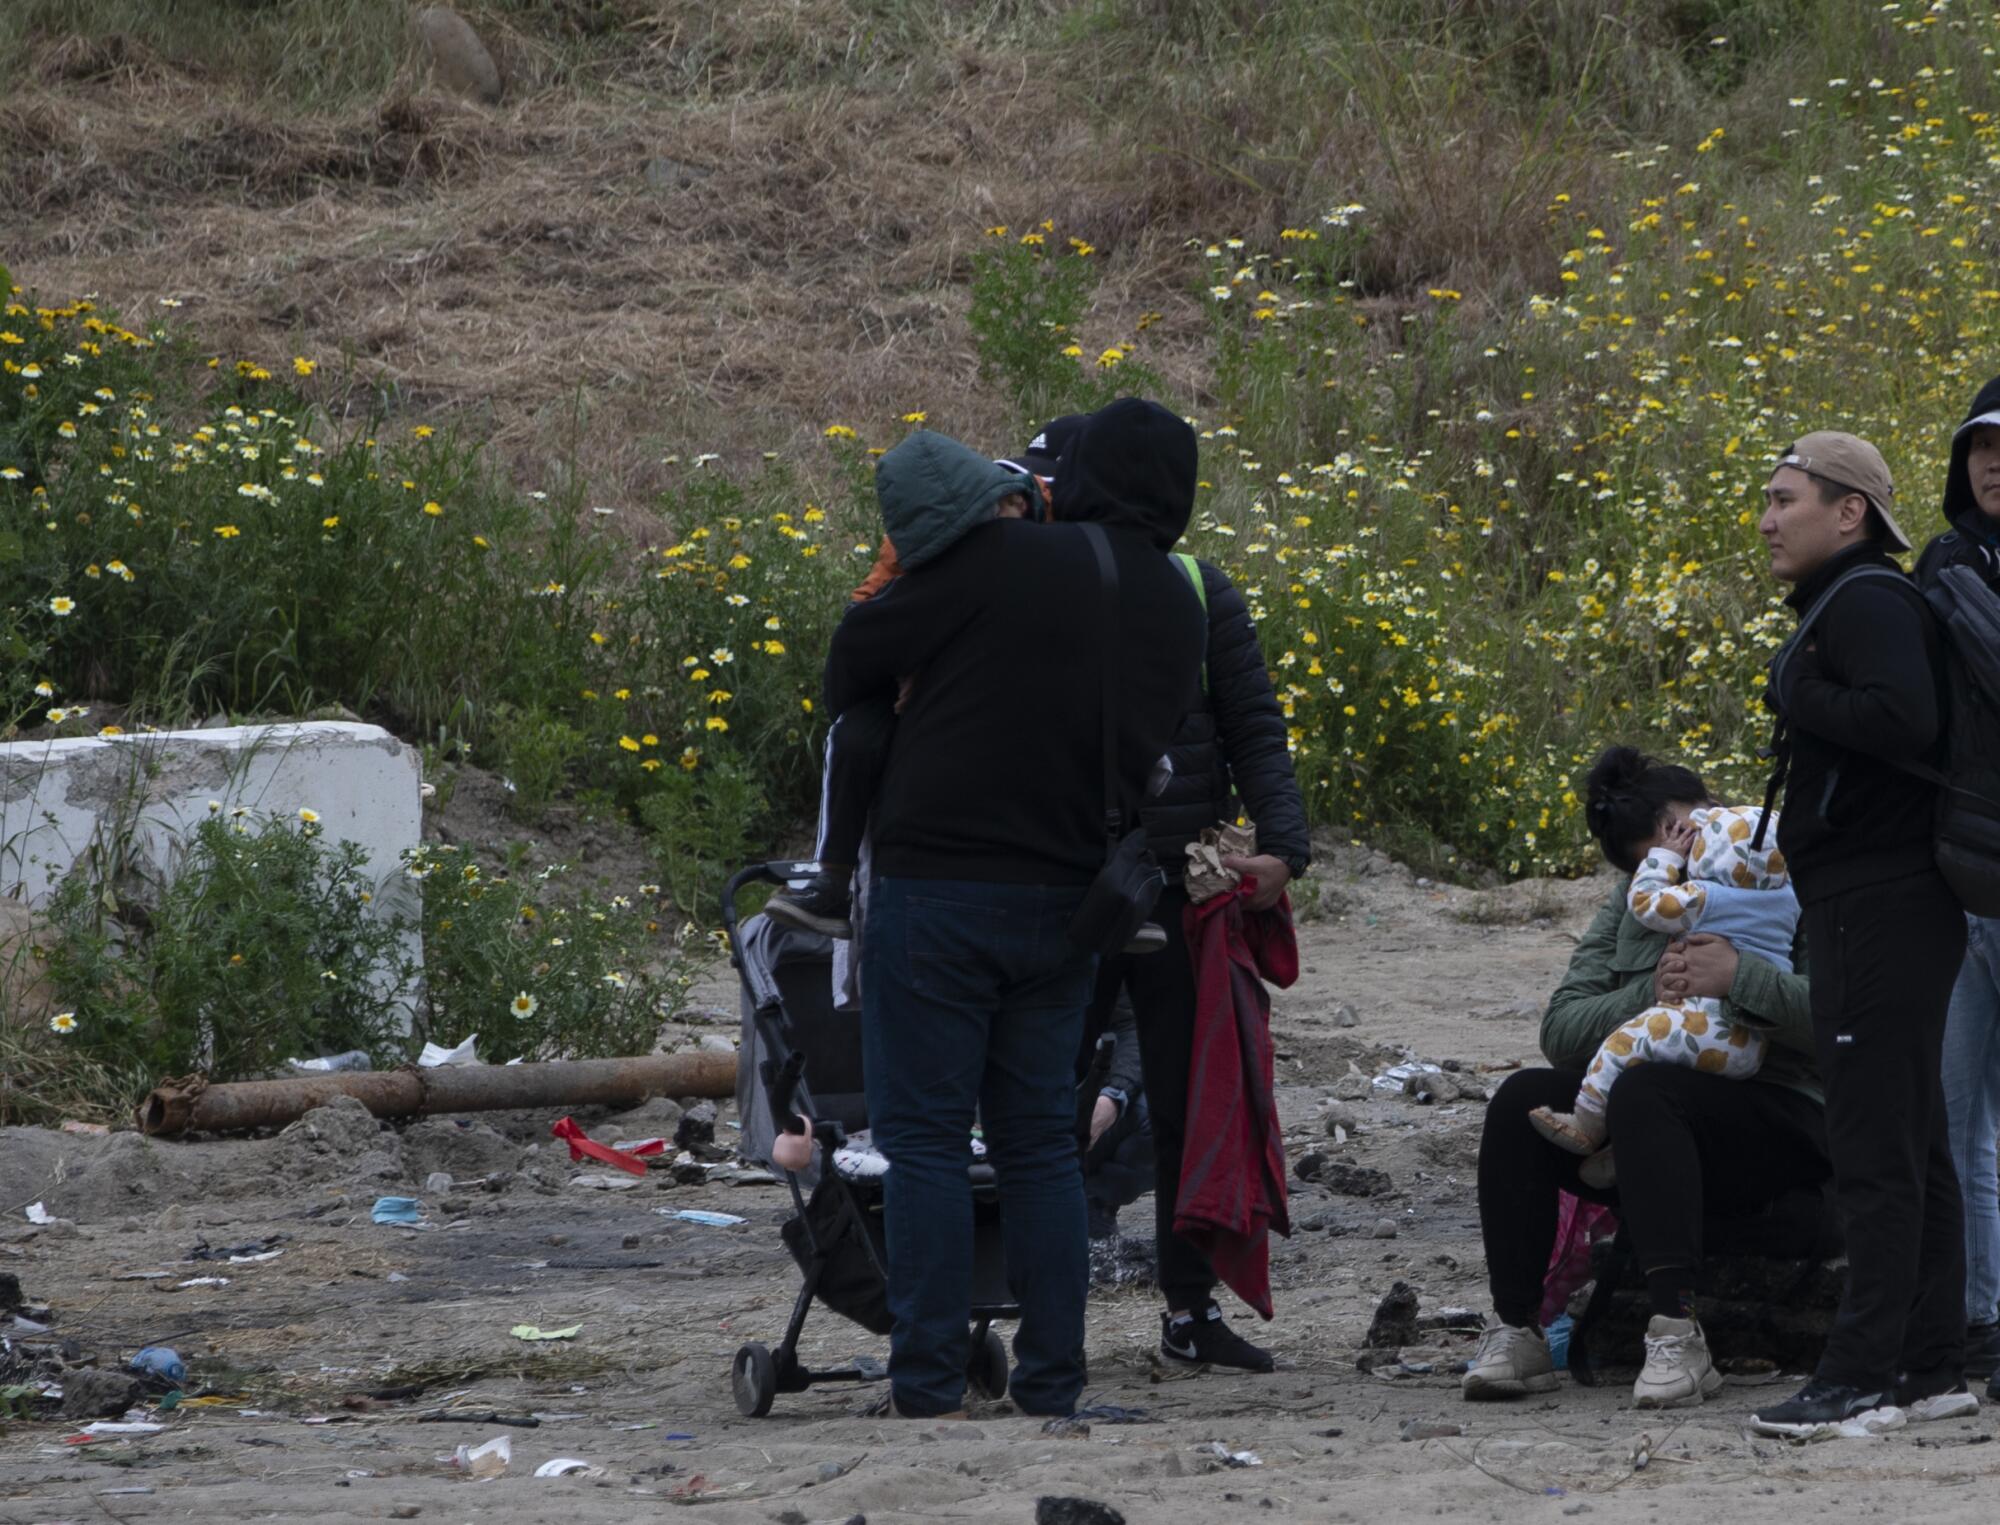 A woman with a baby sits between the border walls